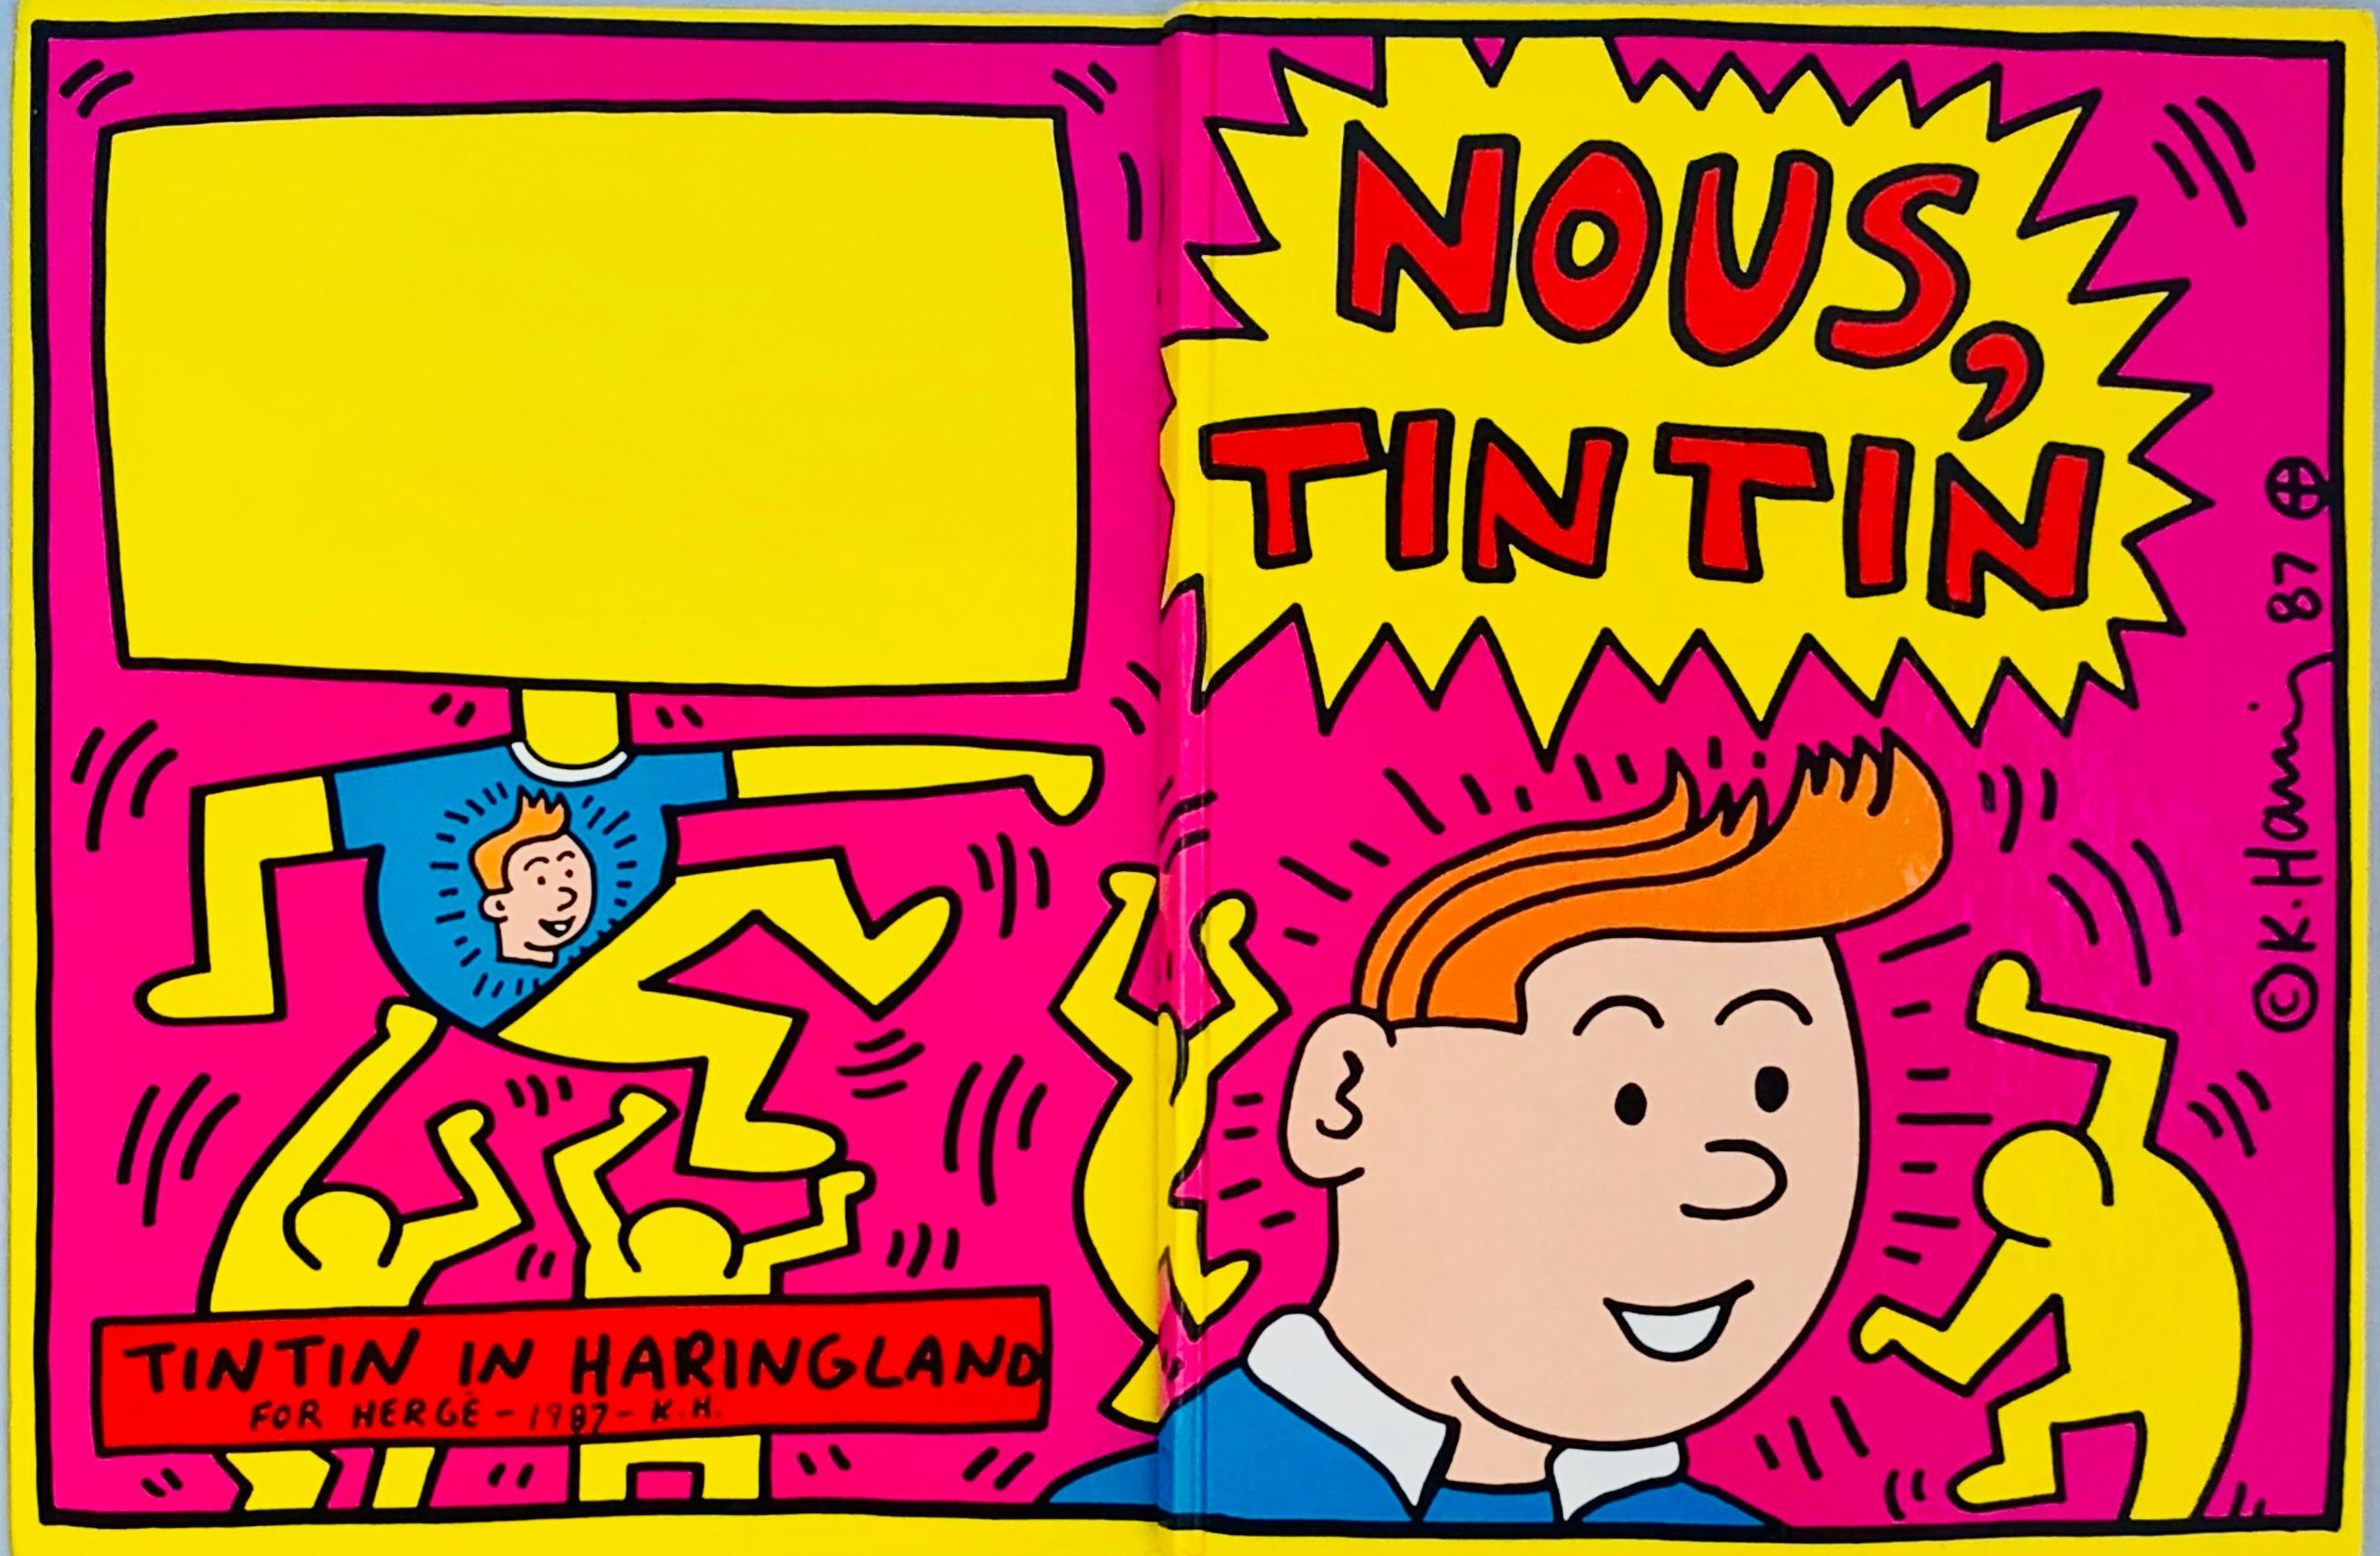 Keith Haring illustrated Nous Tintin 1987, 'Keith Haring in Tintin Land'
An artist tribute collection to Tintin featuring double-sided original cover art by Keith Haring. Brilliant cover illustration that would look excellent framed. Rare and not to